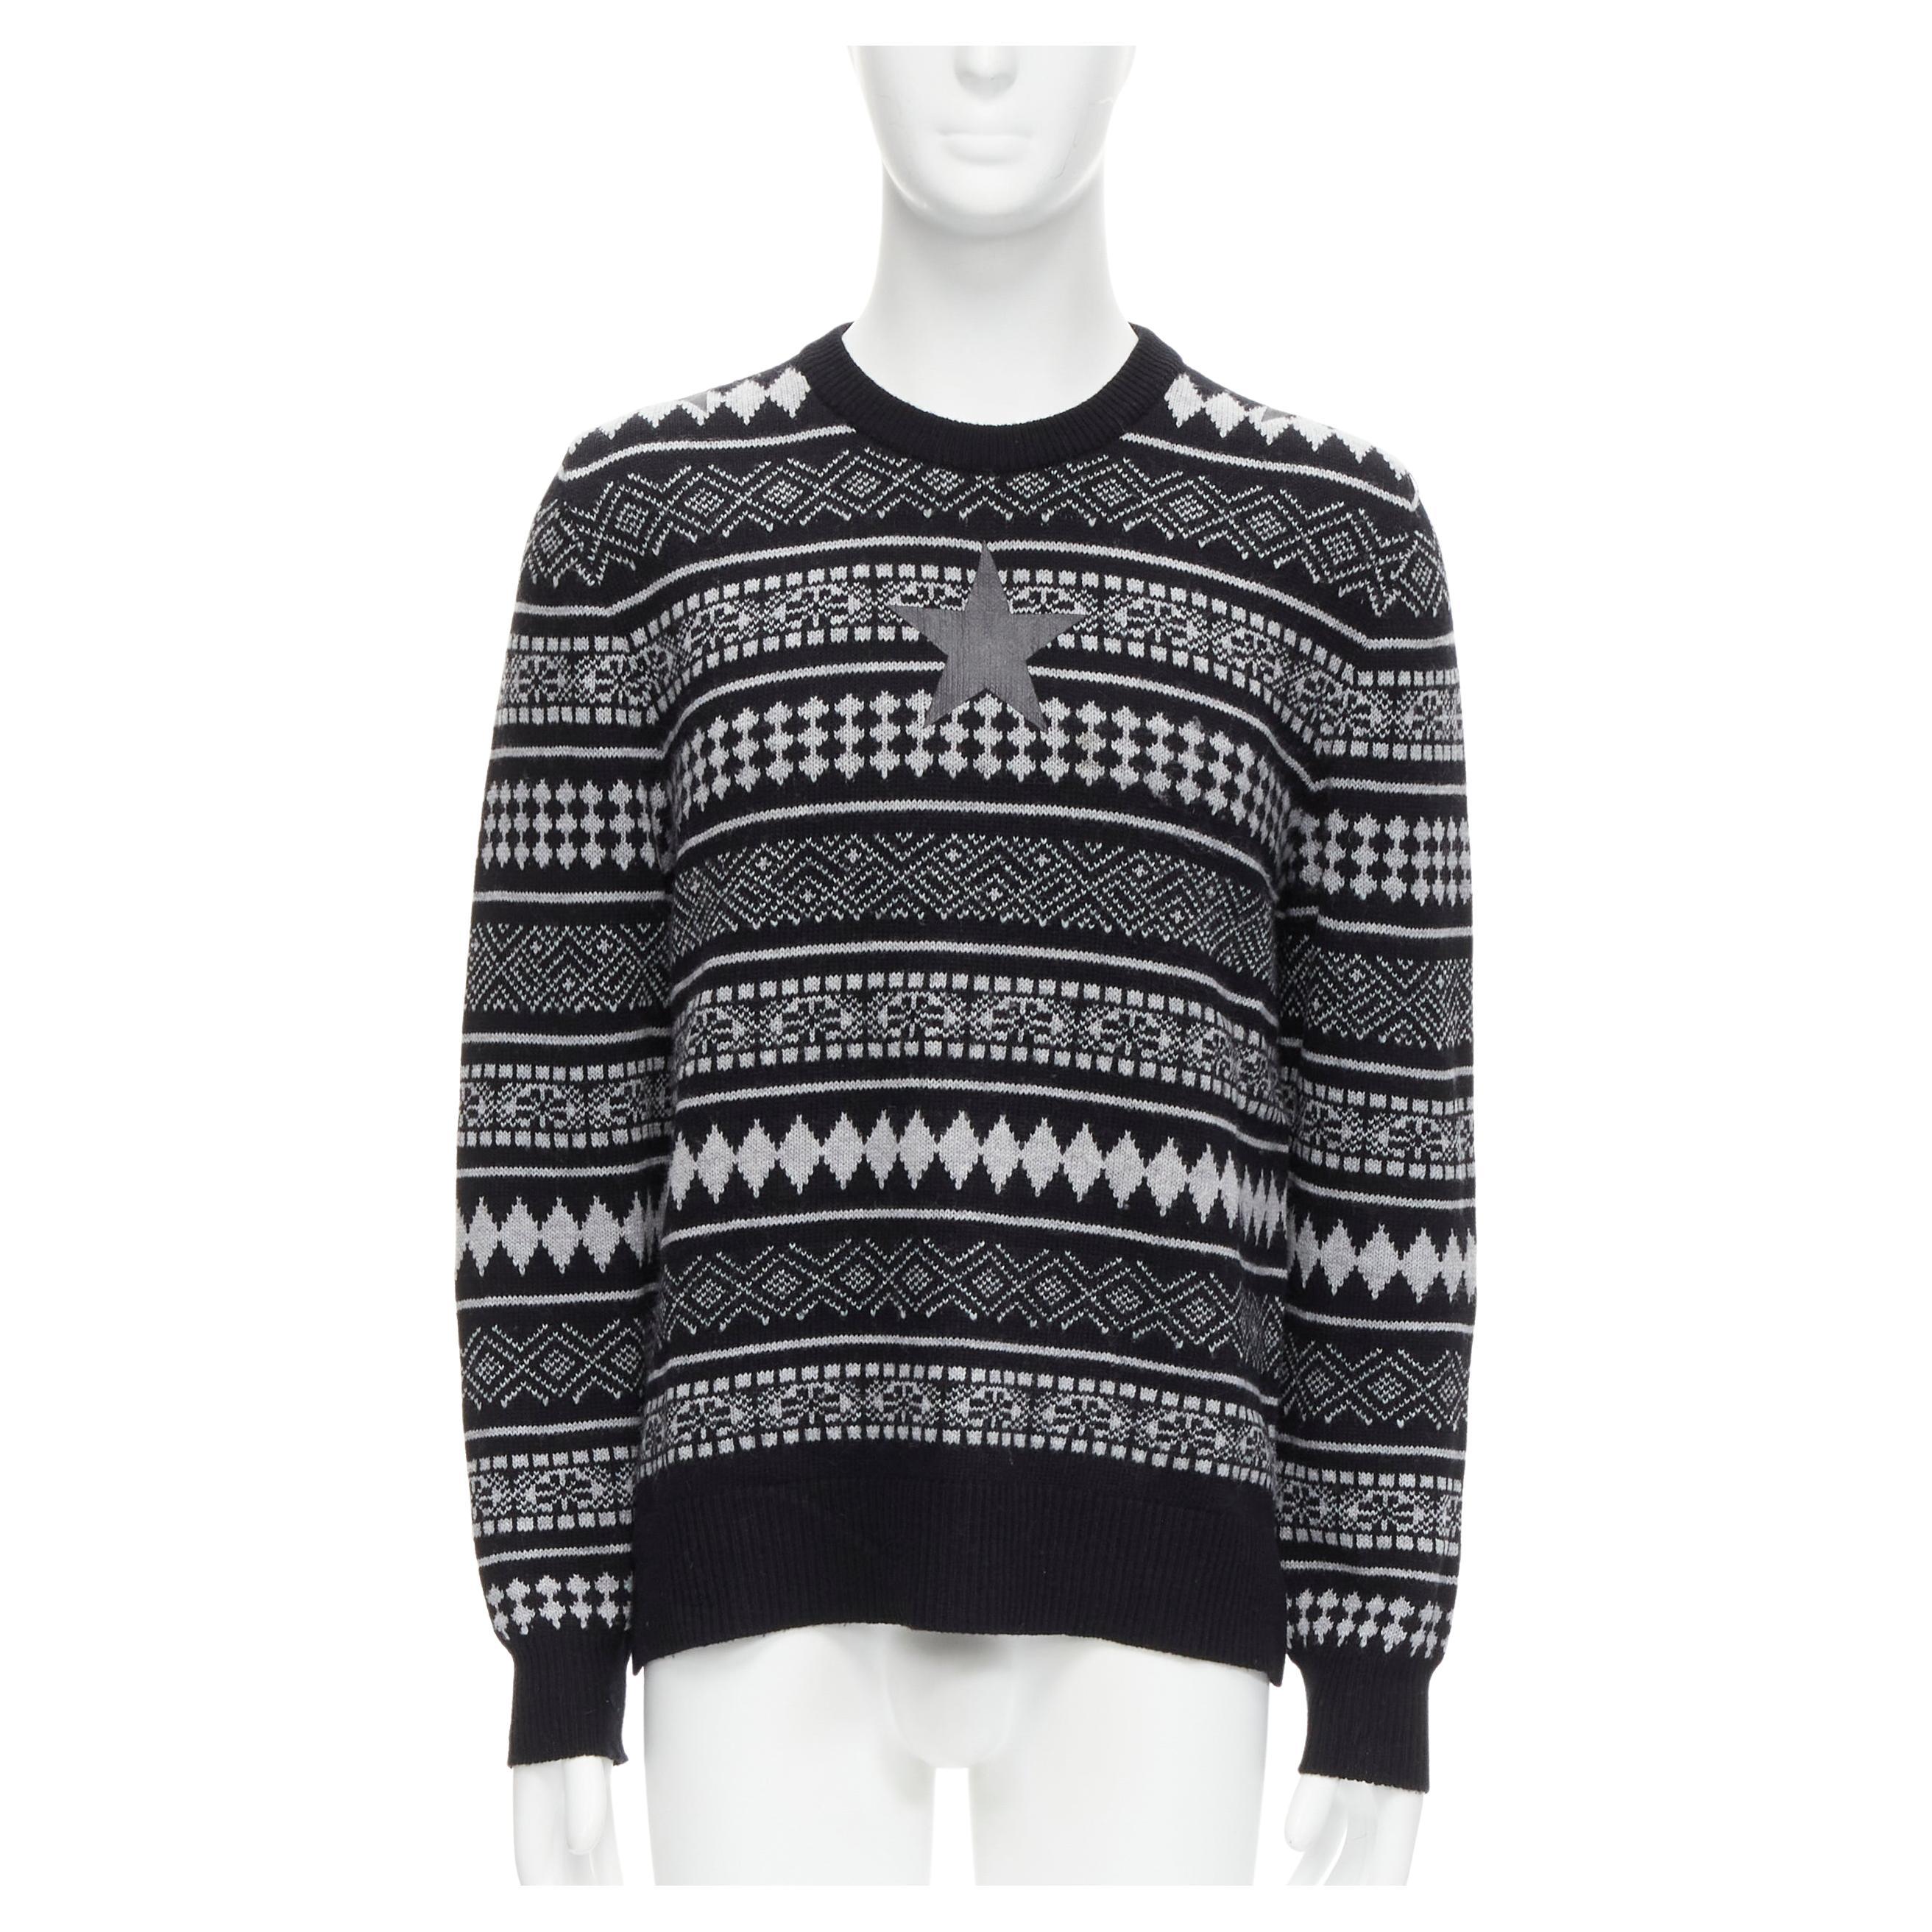 GIVENCHY Riccardo Tisci textured star stripes intarsia pullover sweater M For Sale